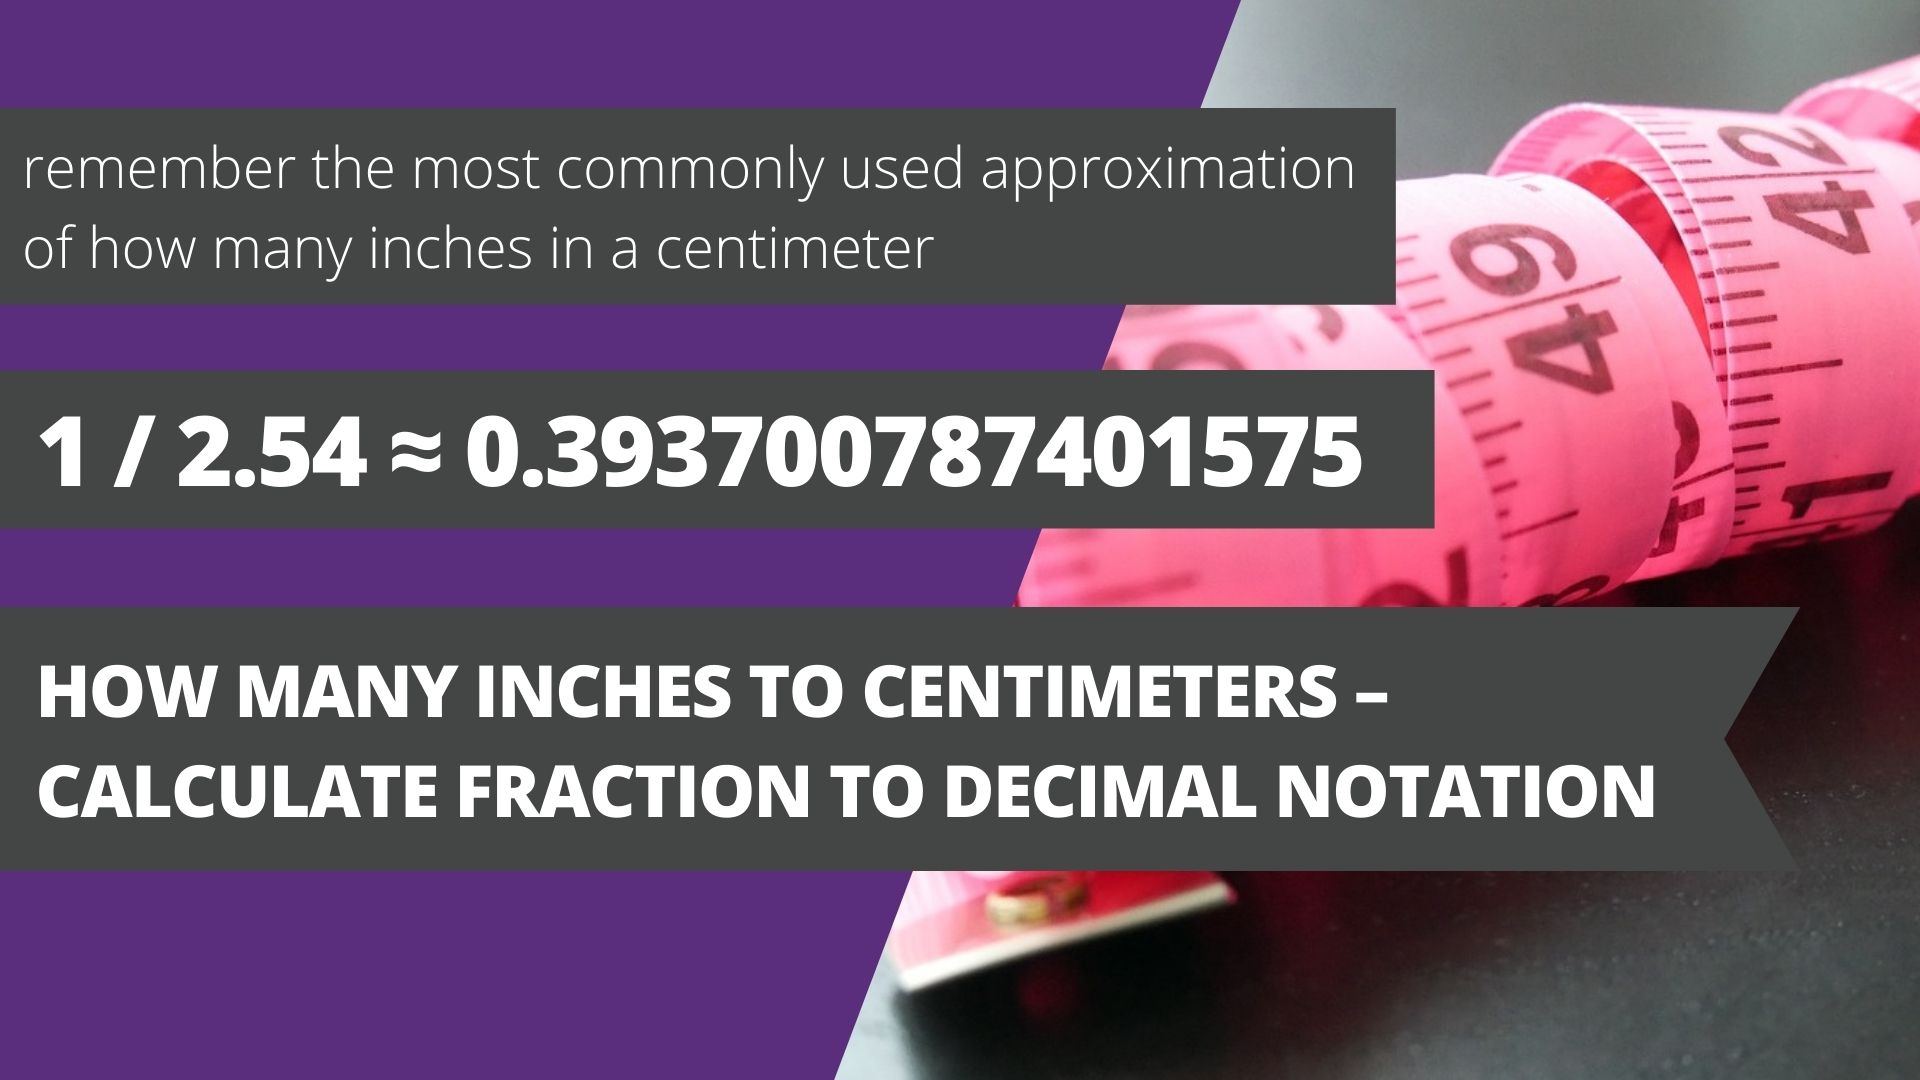 How many inches to centimeters – calculate fraction to decimal notation